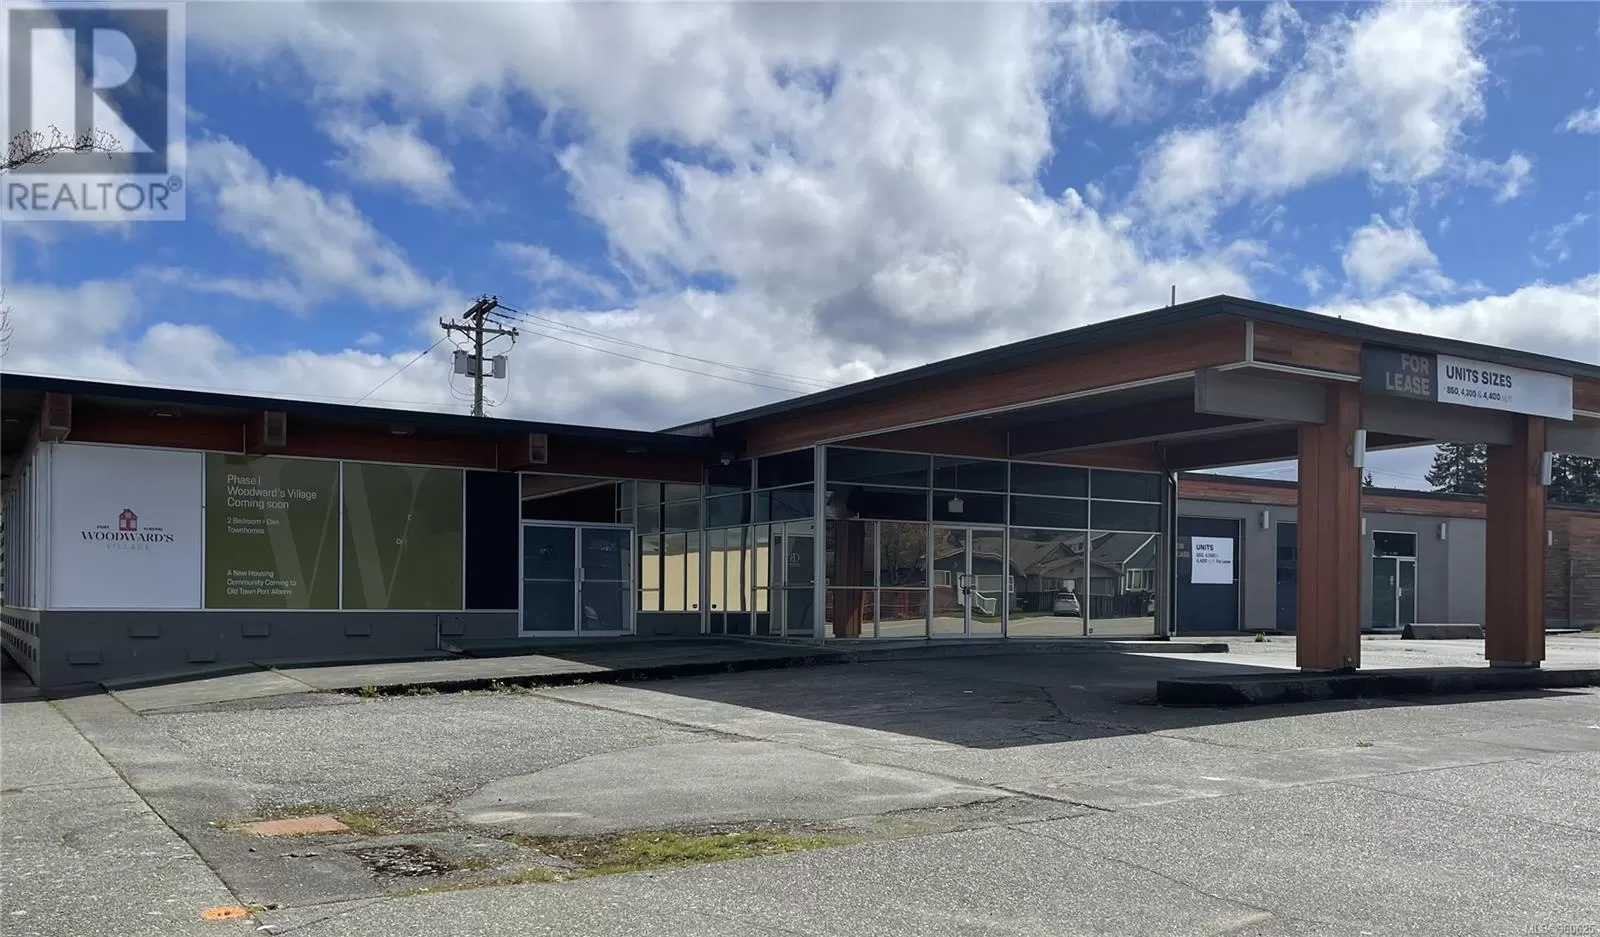 Offices for rent: A 2889 3rd Ave, Port Alberni, British Columbia V9Y 2A9